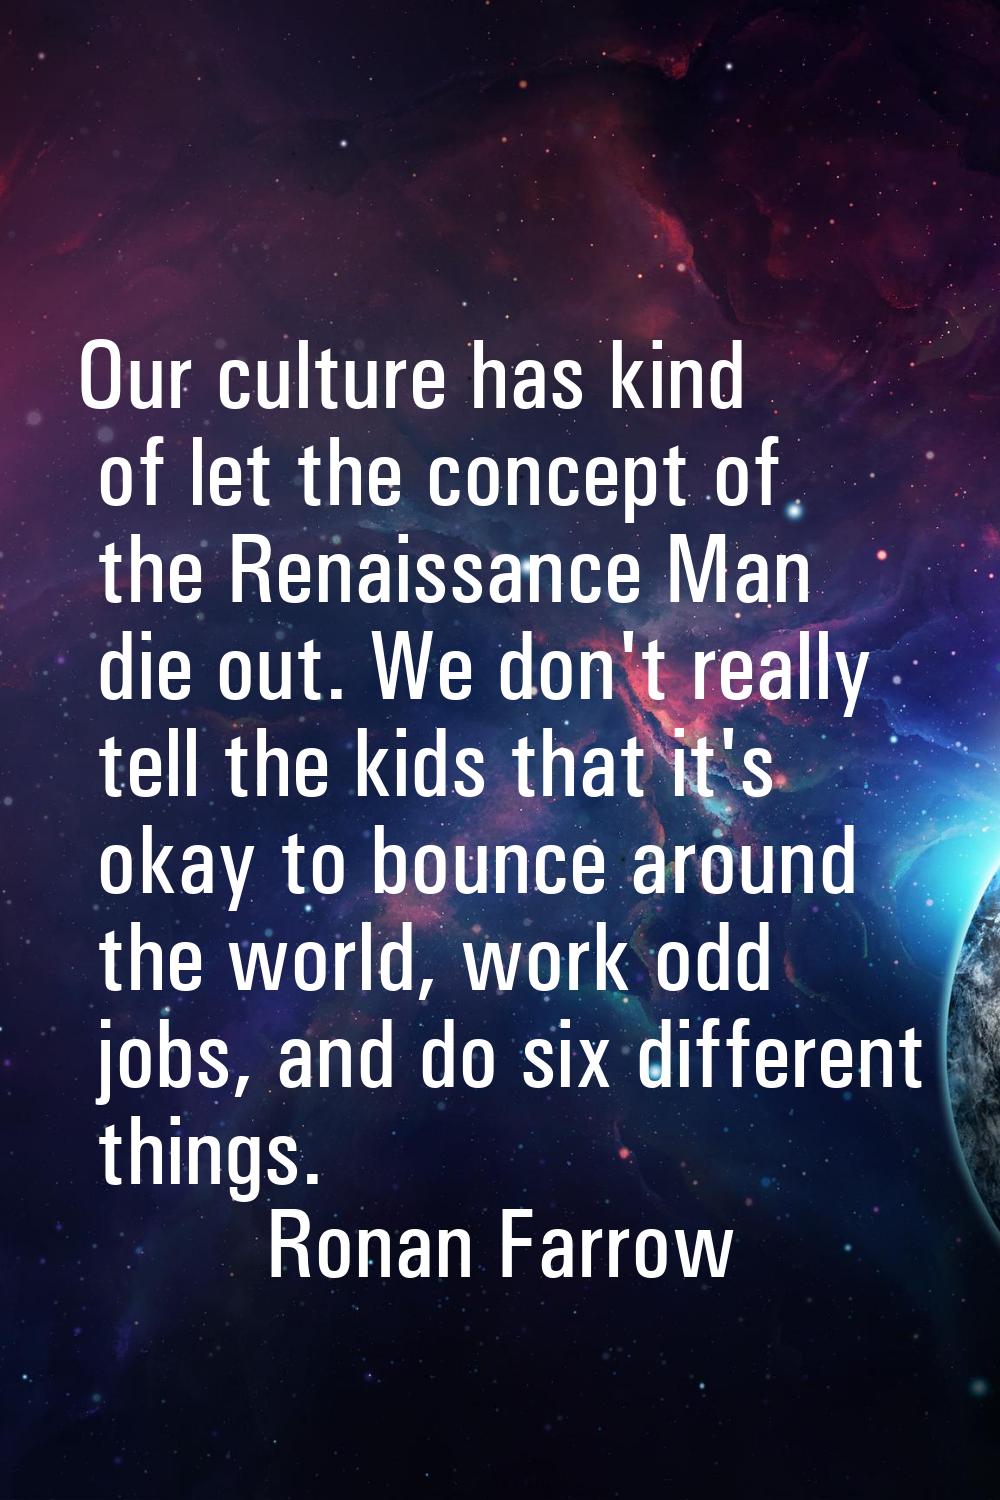 Our culture has kind of let the concept of the Renaissance Man die out. We don't really tell the ki